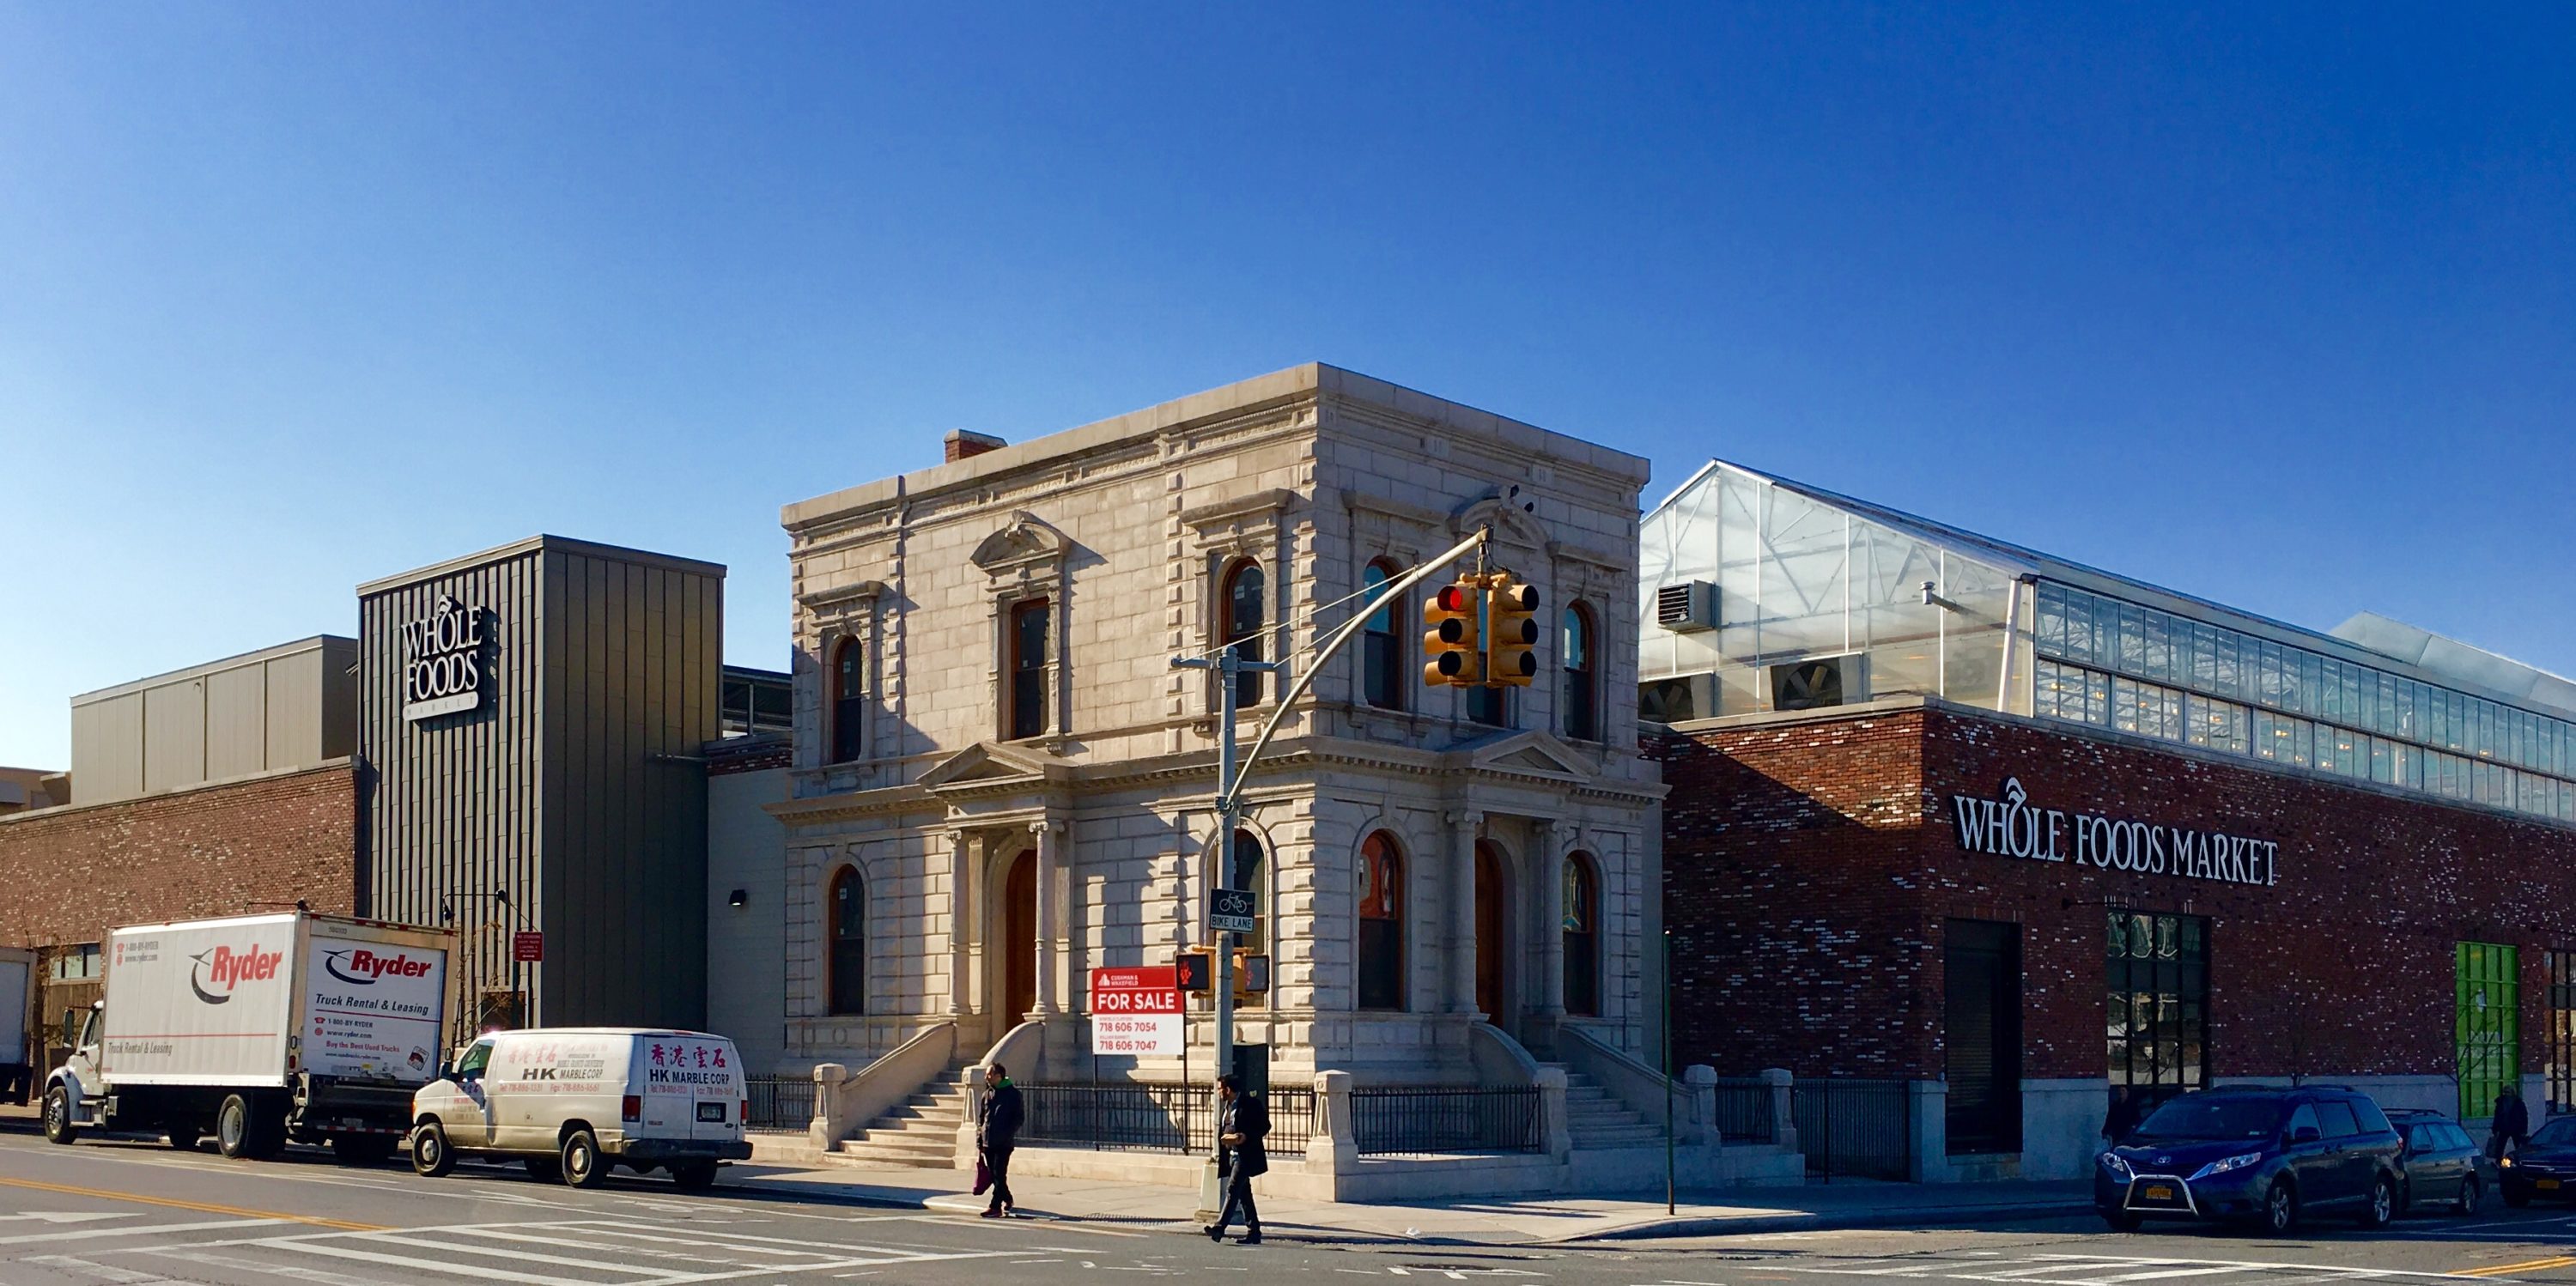 For sale, again: The Coignet Building, shown here surrounded by the Gowanus Whole Foods Market. Eagle file photo by Lore Croghan